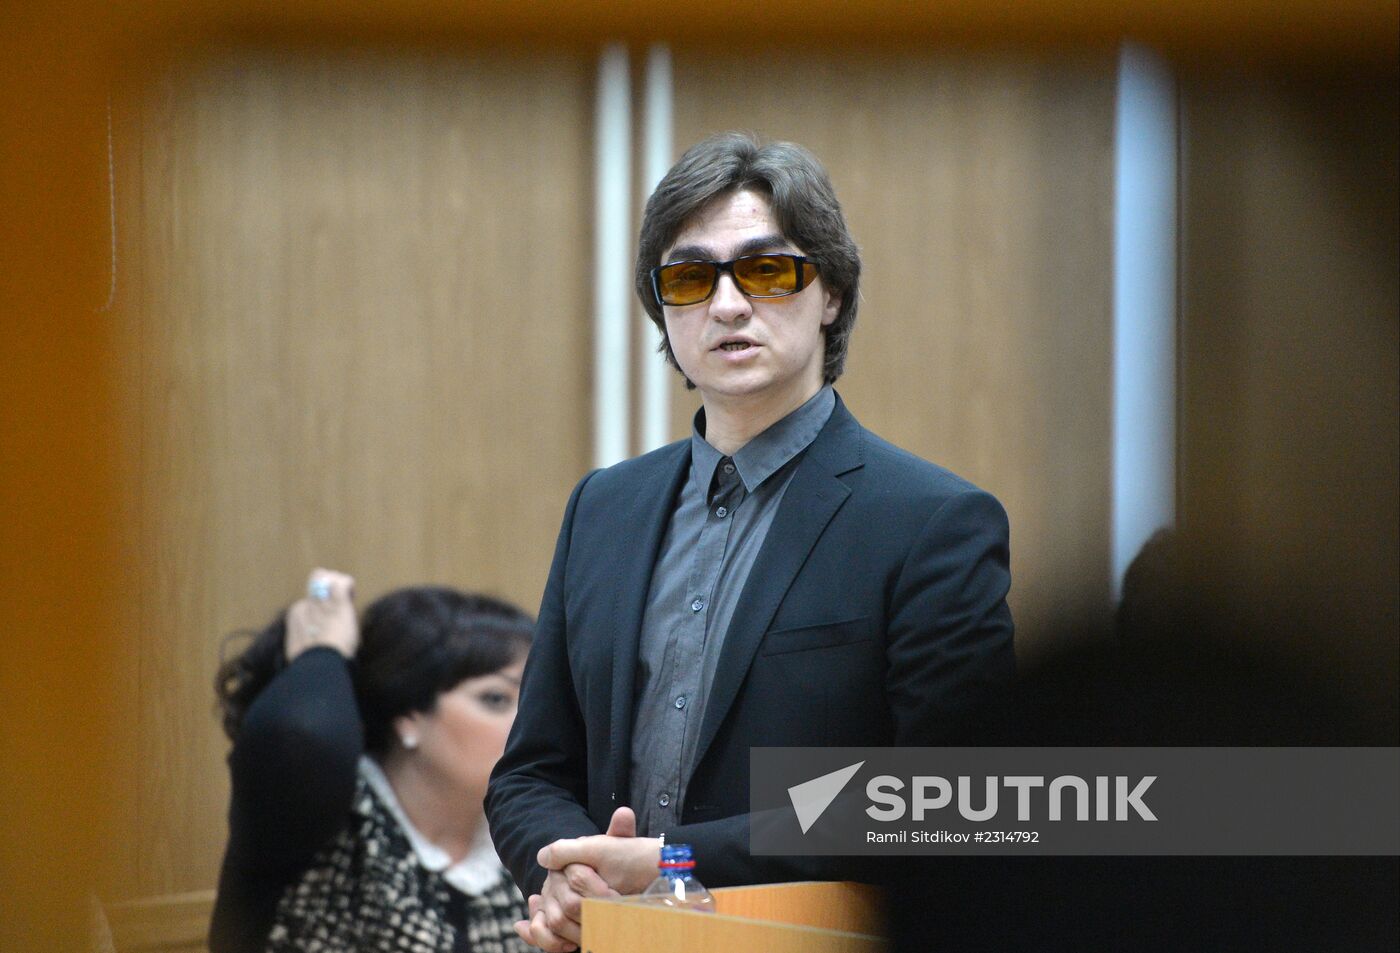 Sergei Filin summoned to court for questioning in case of attack on him